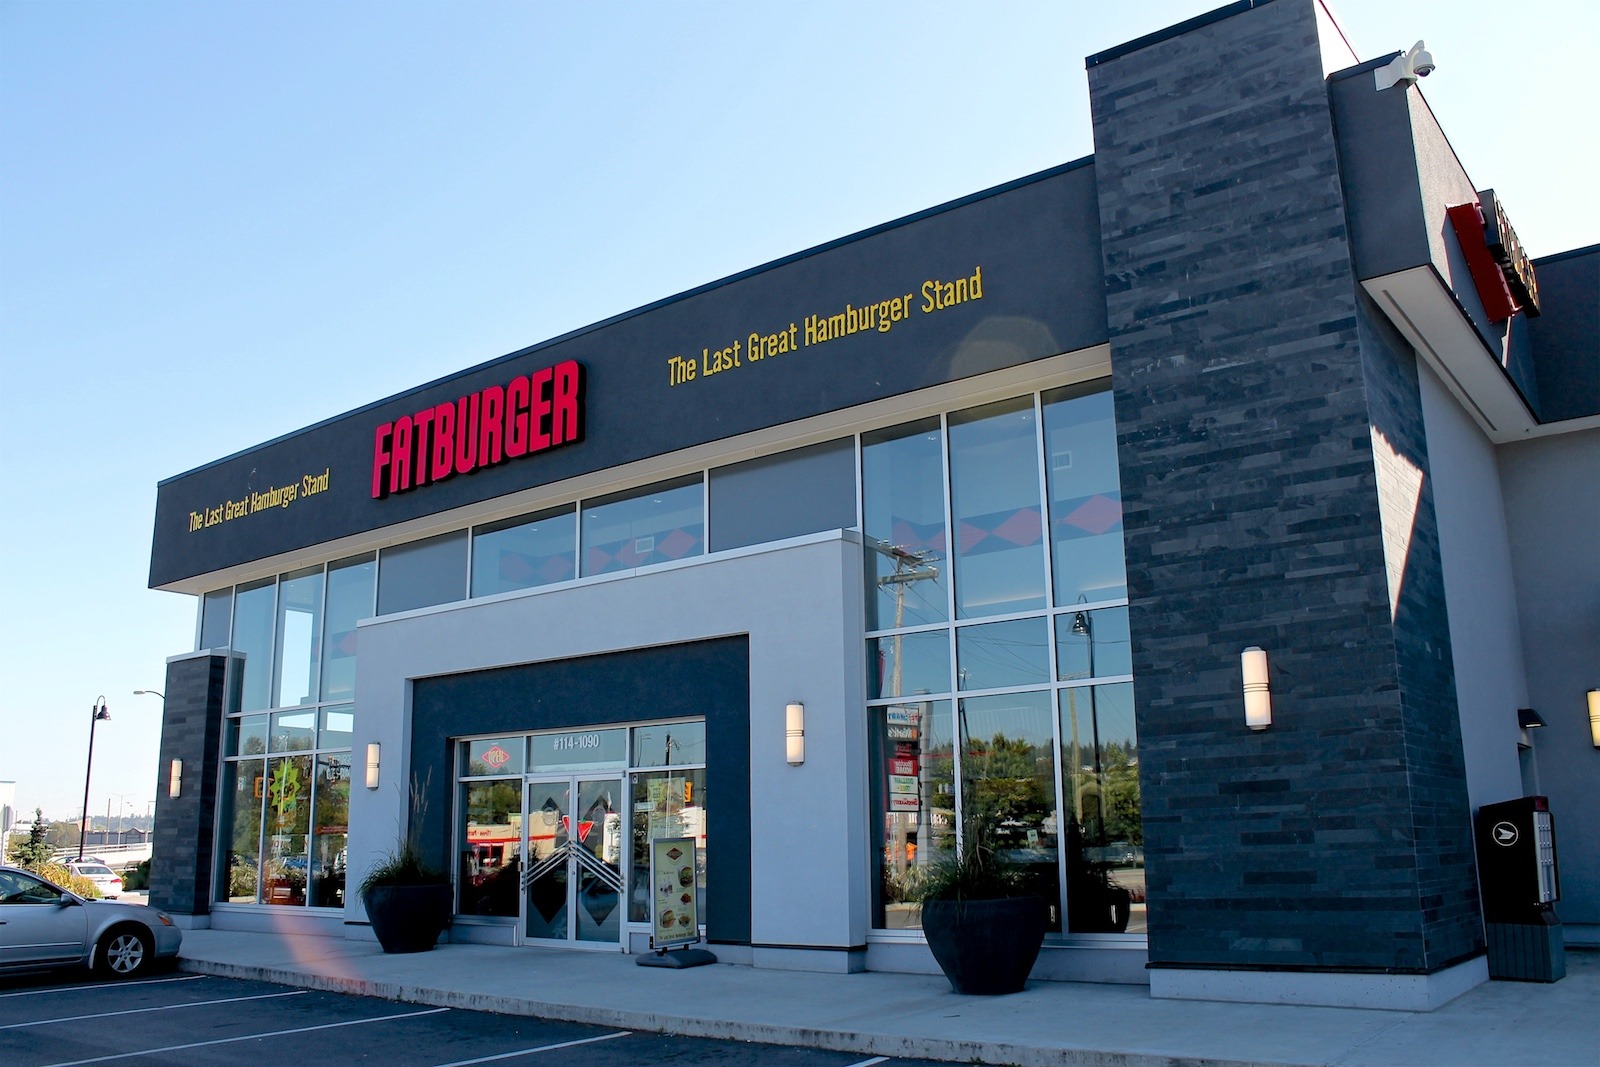 Restaurants & Hospitality- Ricky's Bar&Grill/Fatburger
Completed 2014